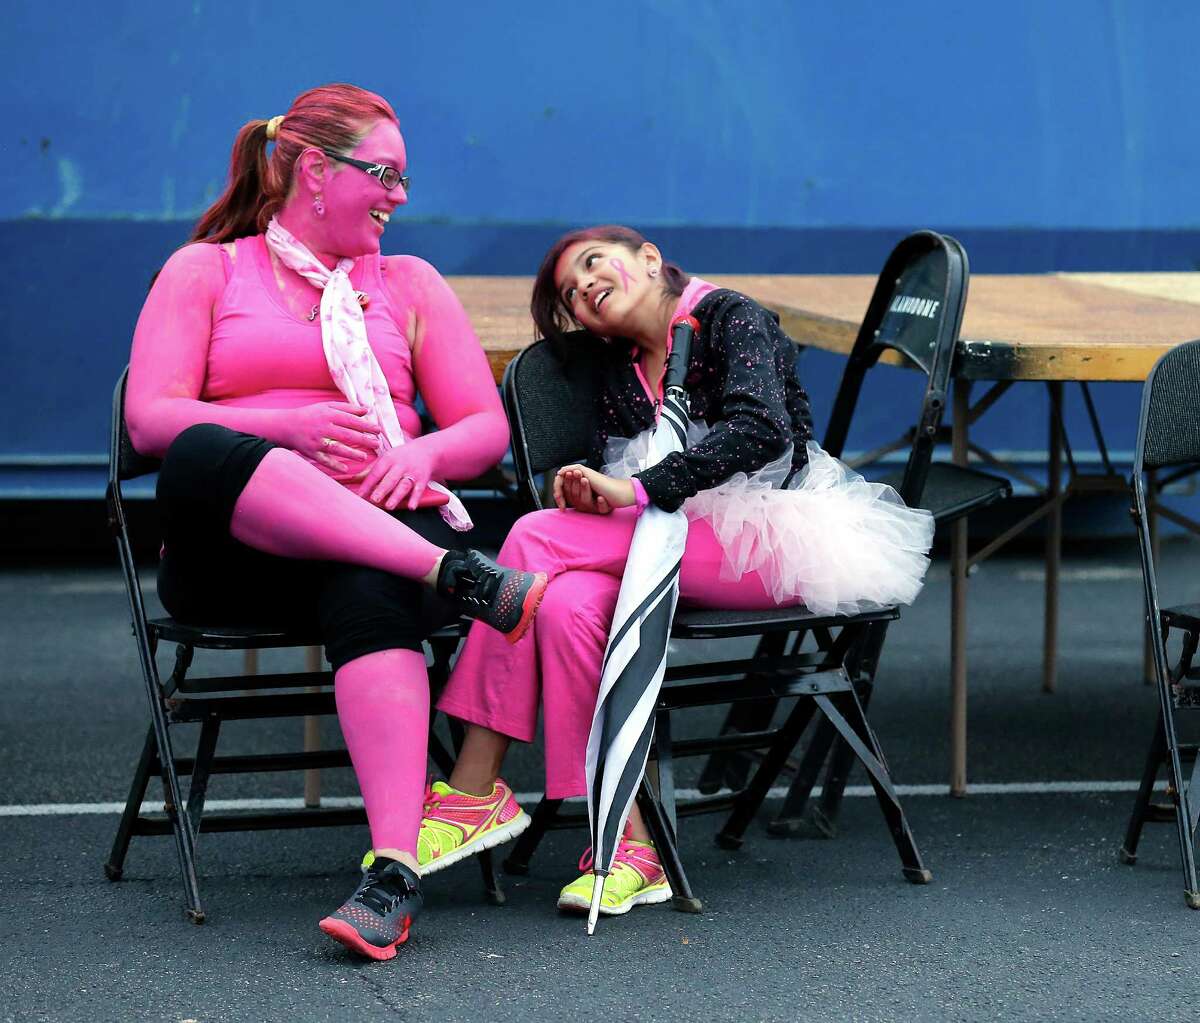 Judith Mares (left) goes all pink as she prepares to take part in the 18th annual Susan G. Komen Race For The Cure with her daughter, Xiomara, at the Alamodome on Saturday, Apr. 11, 2015. Mares participated in honor of her grandmother who is a cancer survivor. Thousands took part in the competitive and non-competitive 5K run and walk to raise cancer awareness.